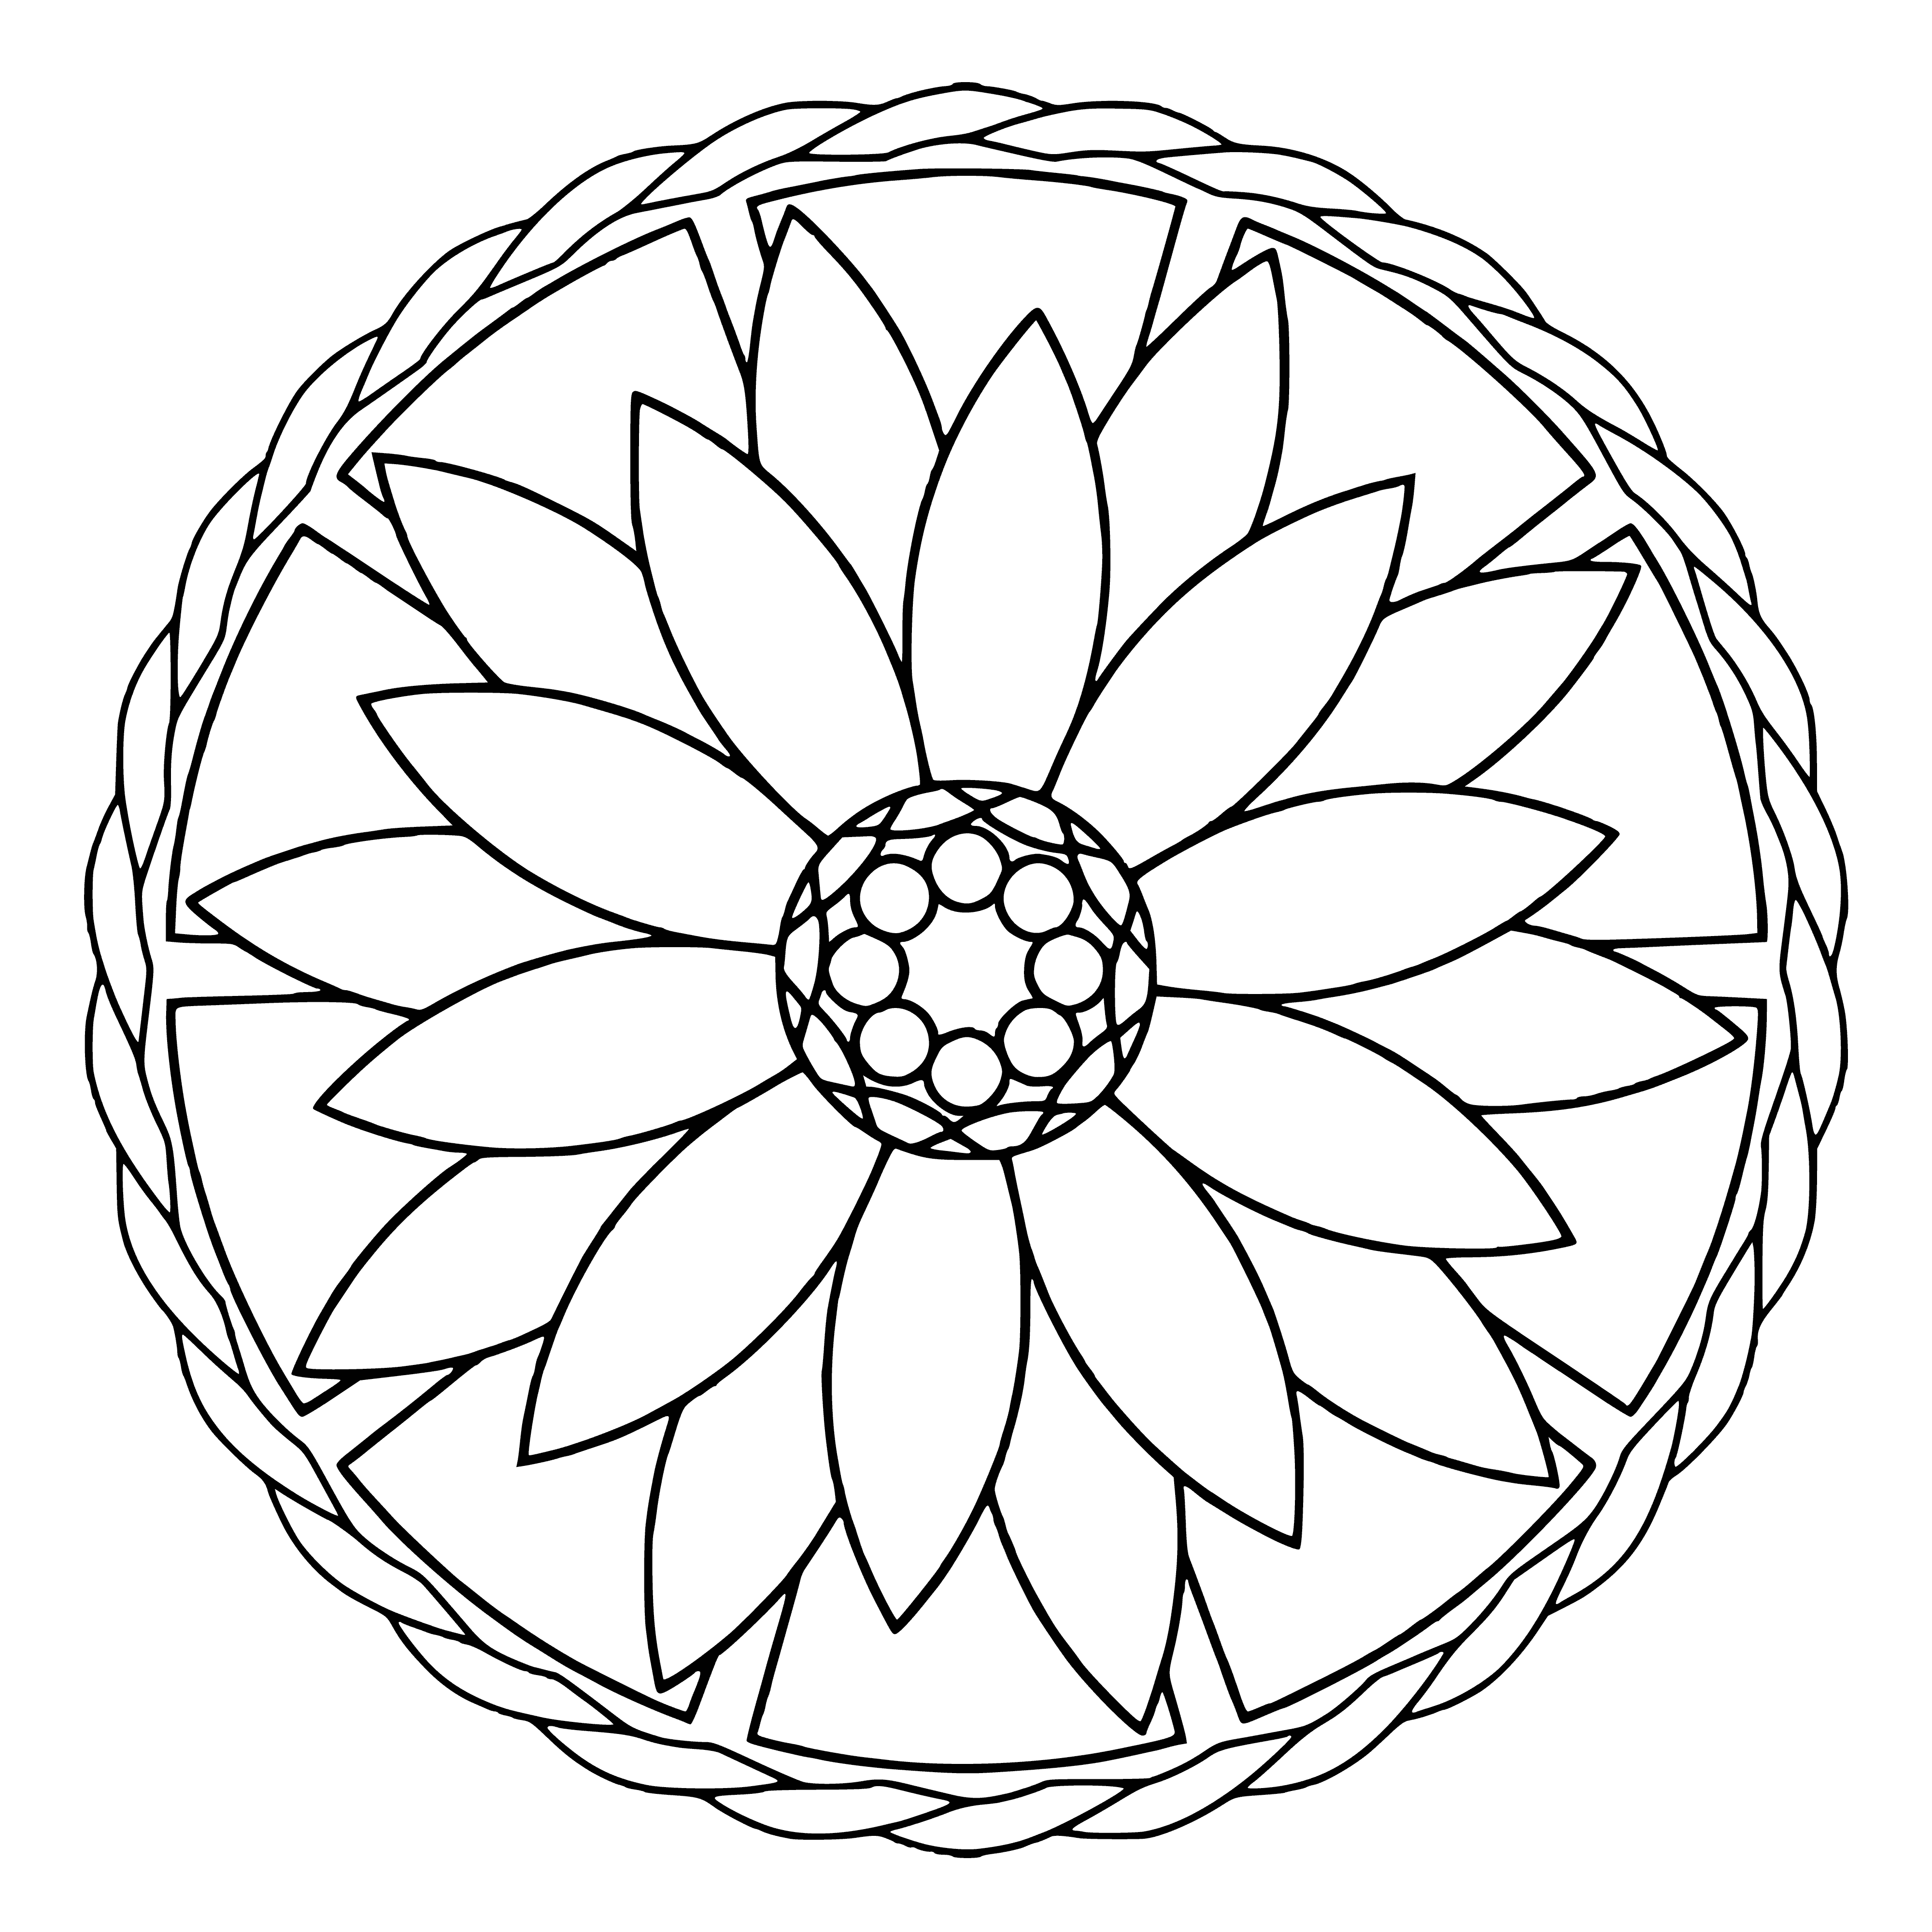 coloring page: Coloring page of a mandala with a flower in the center and intricate patterns. #art #flowers #coloring